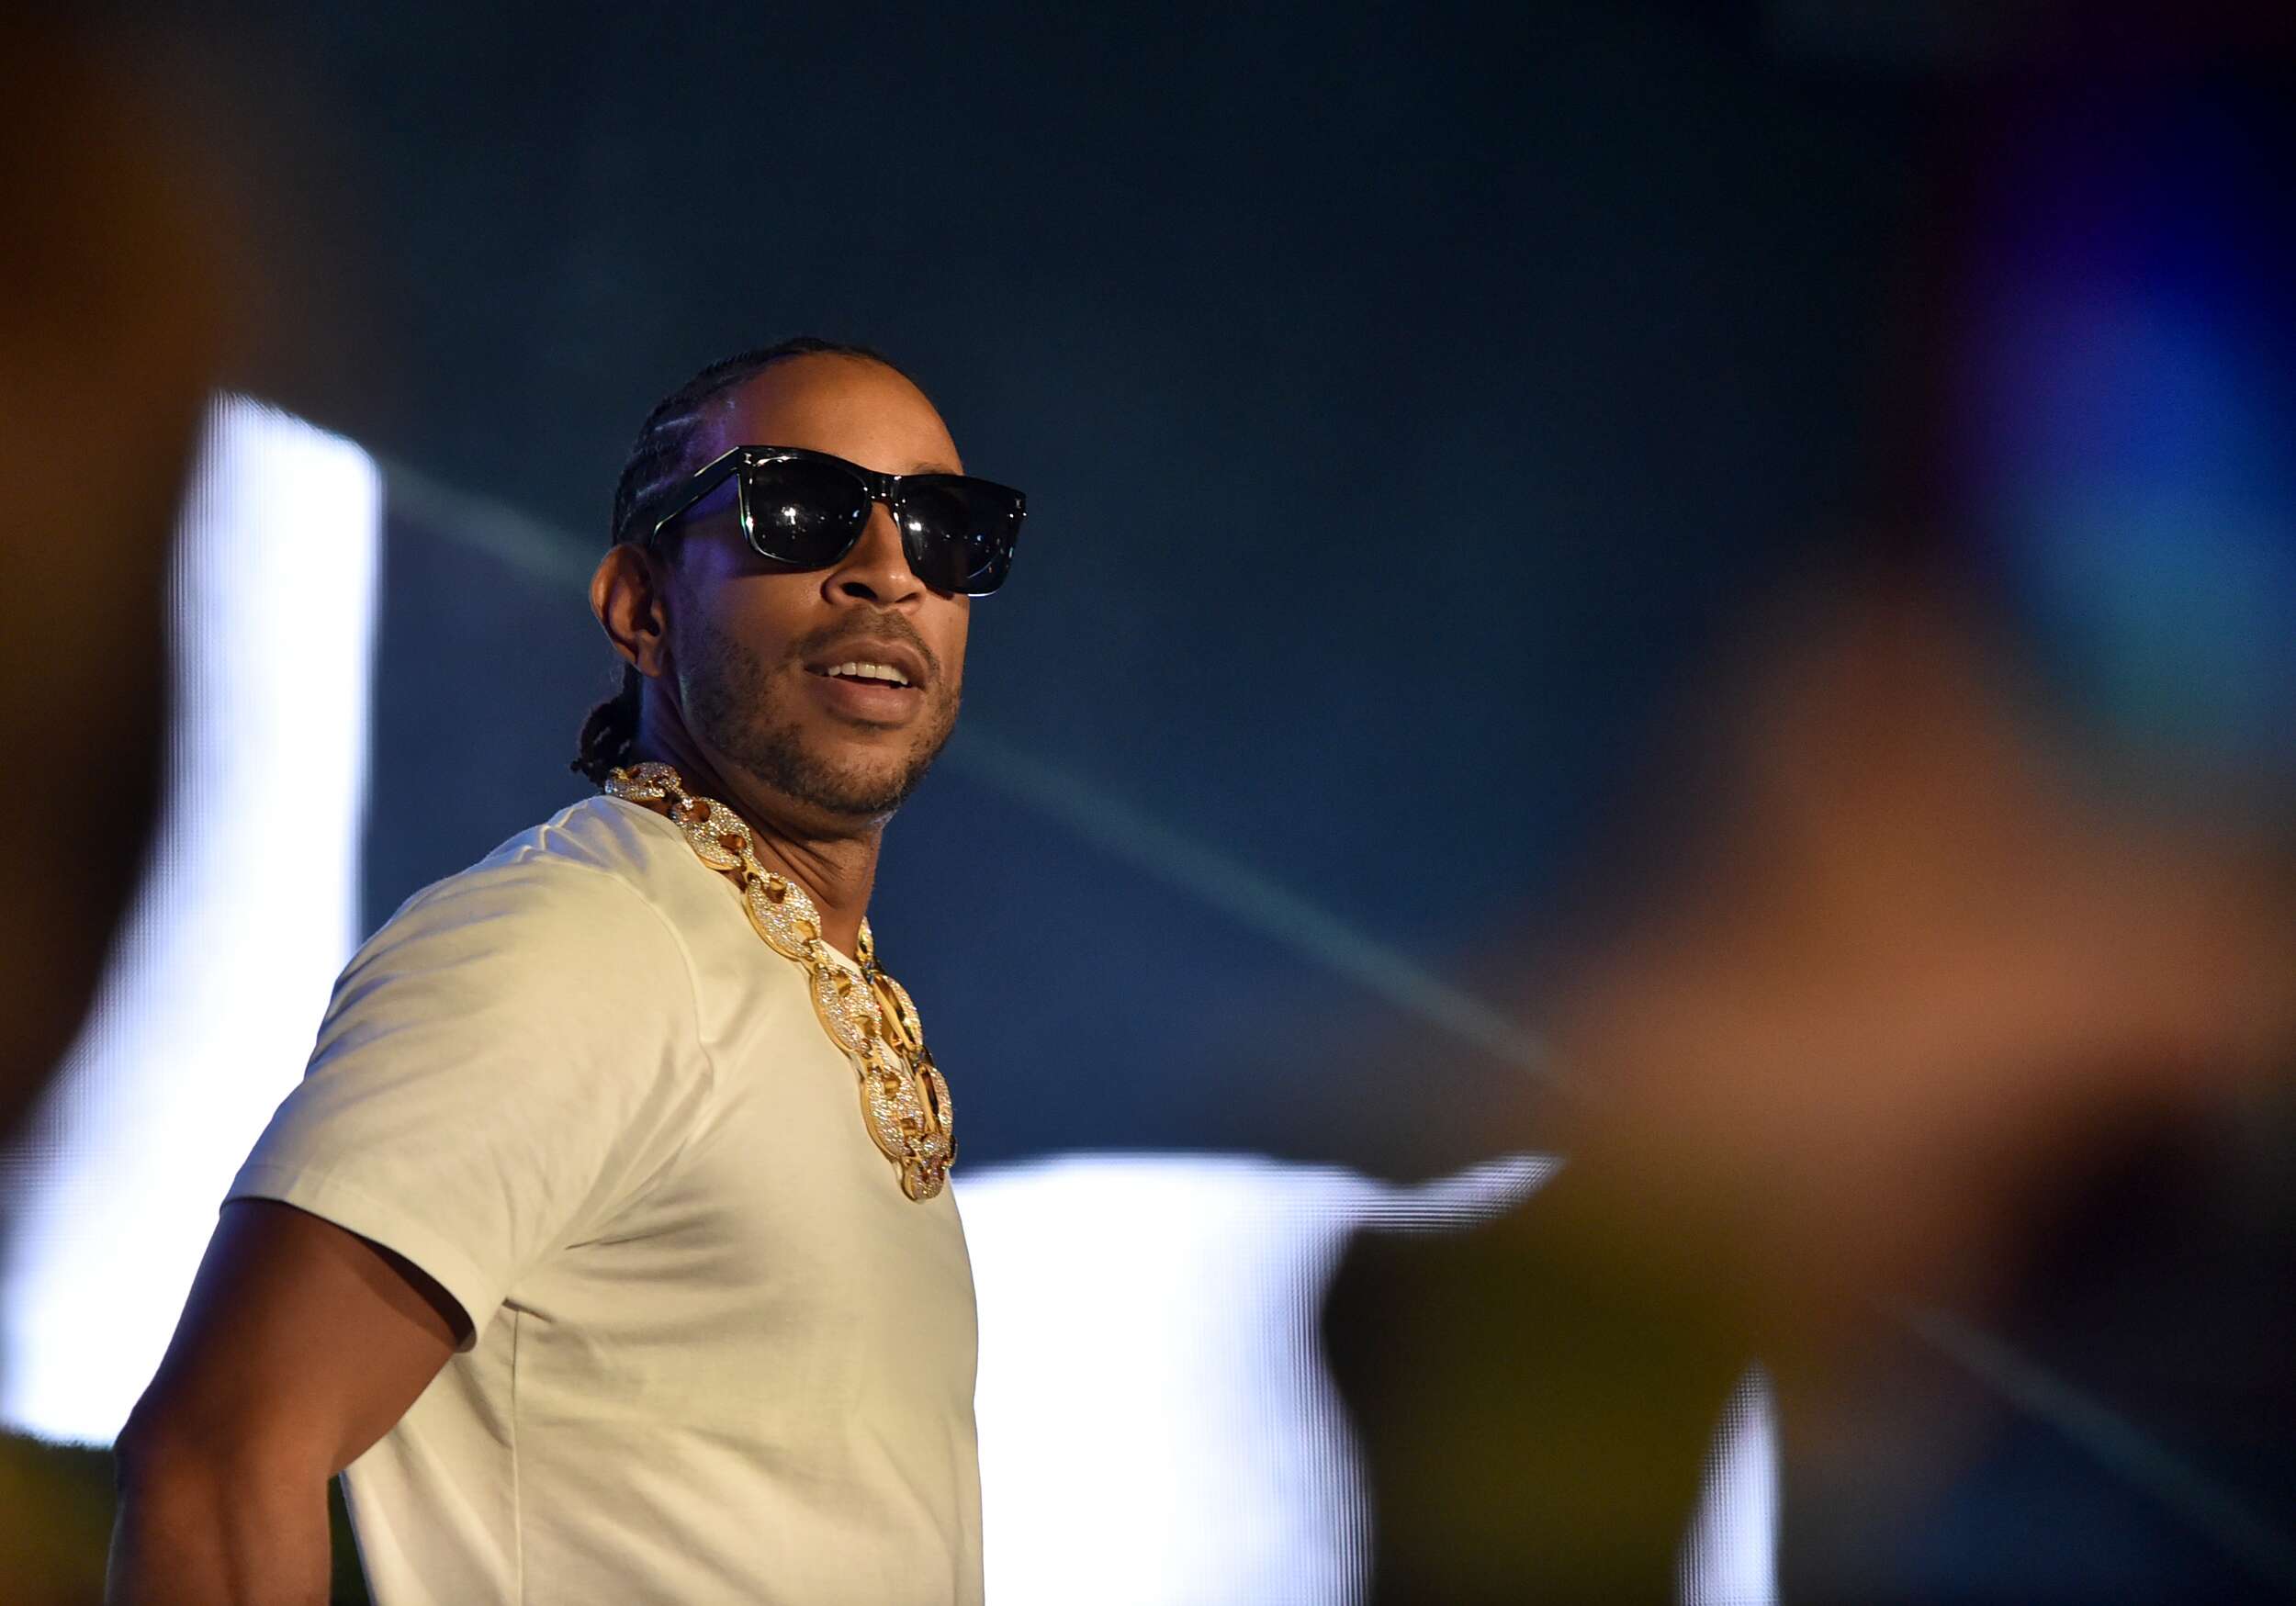 As He Launches A New Freestyle, Ludacris Claims To Be Having "Fun Again"